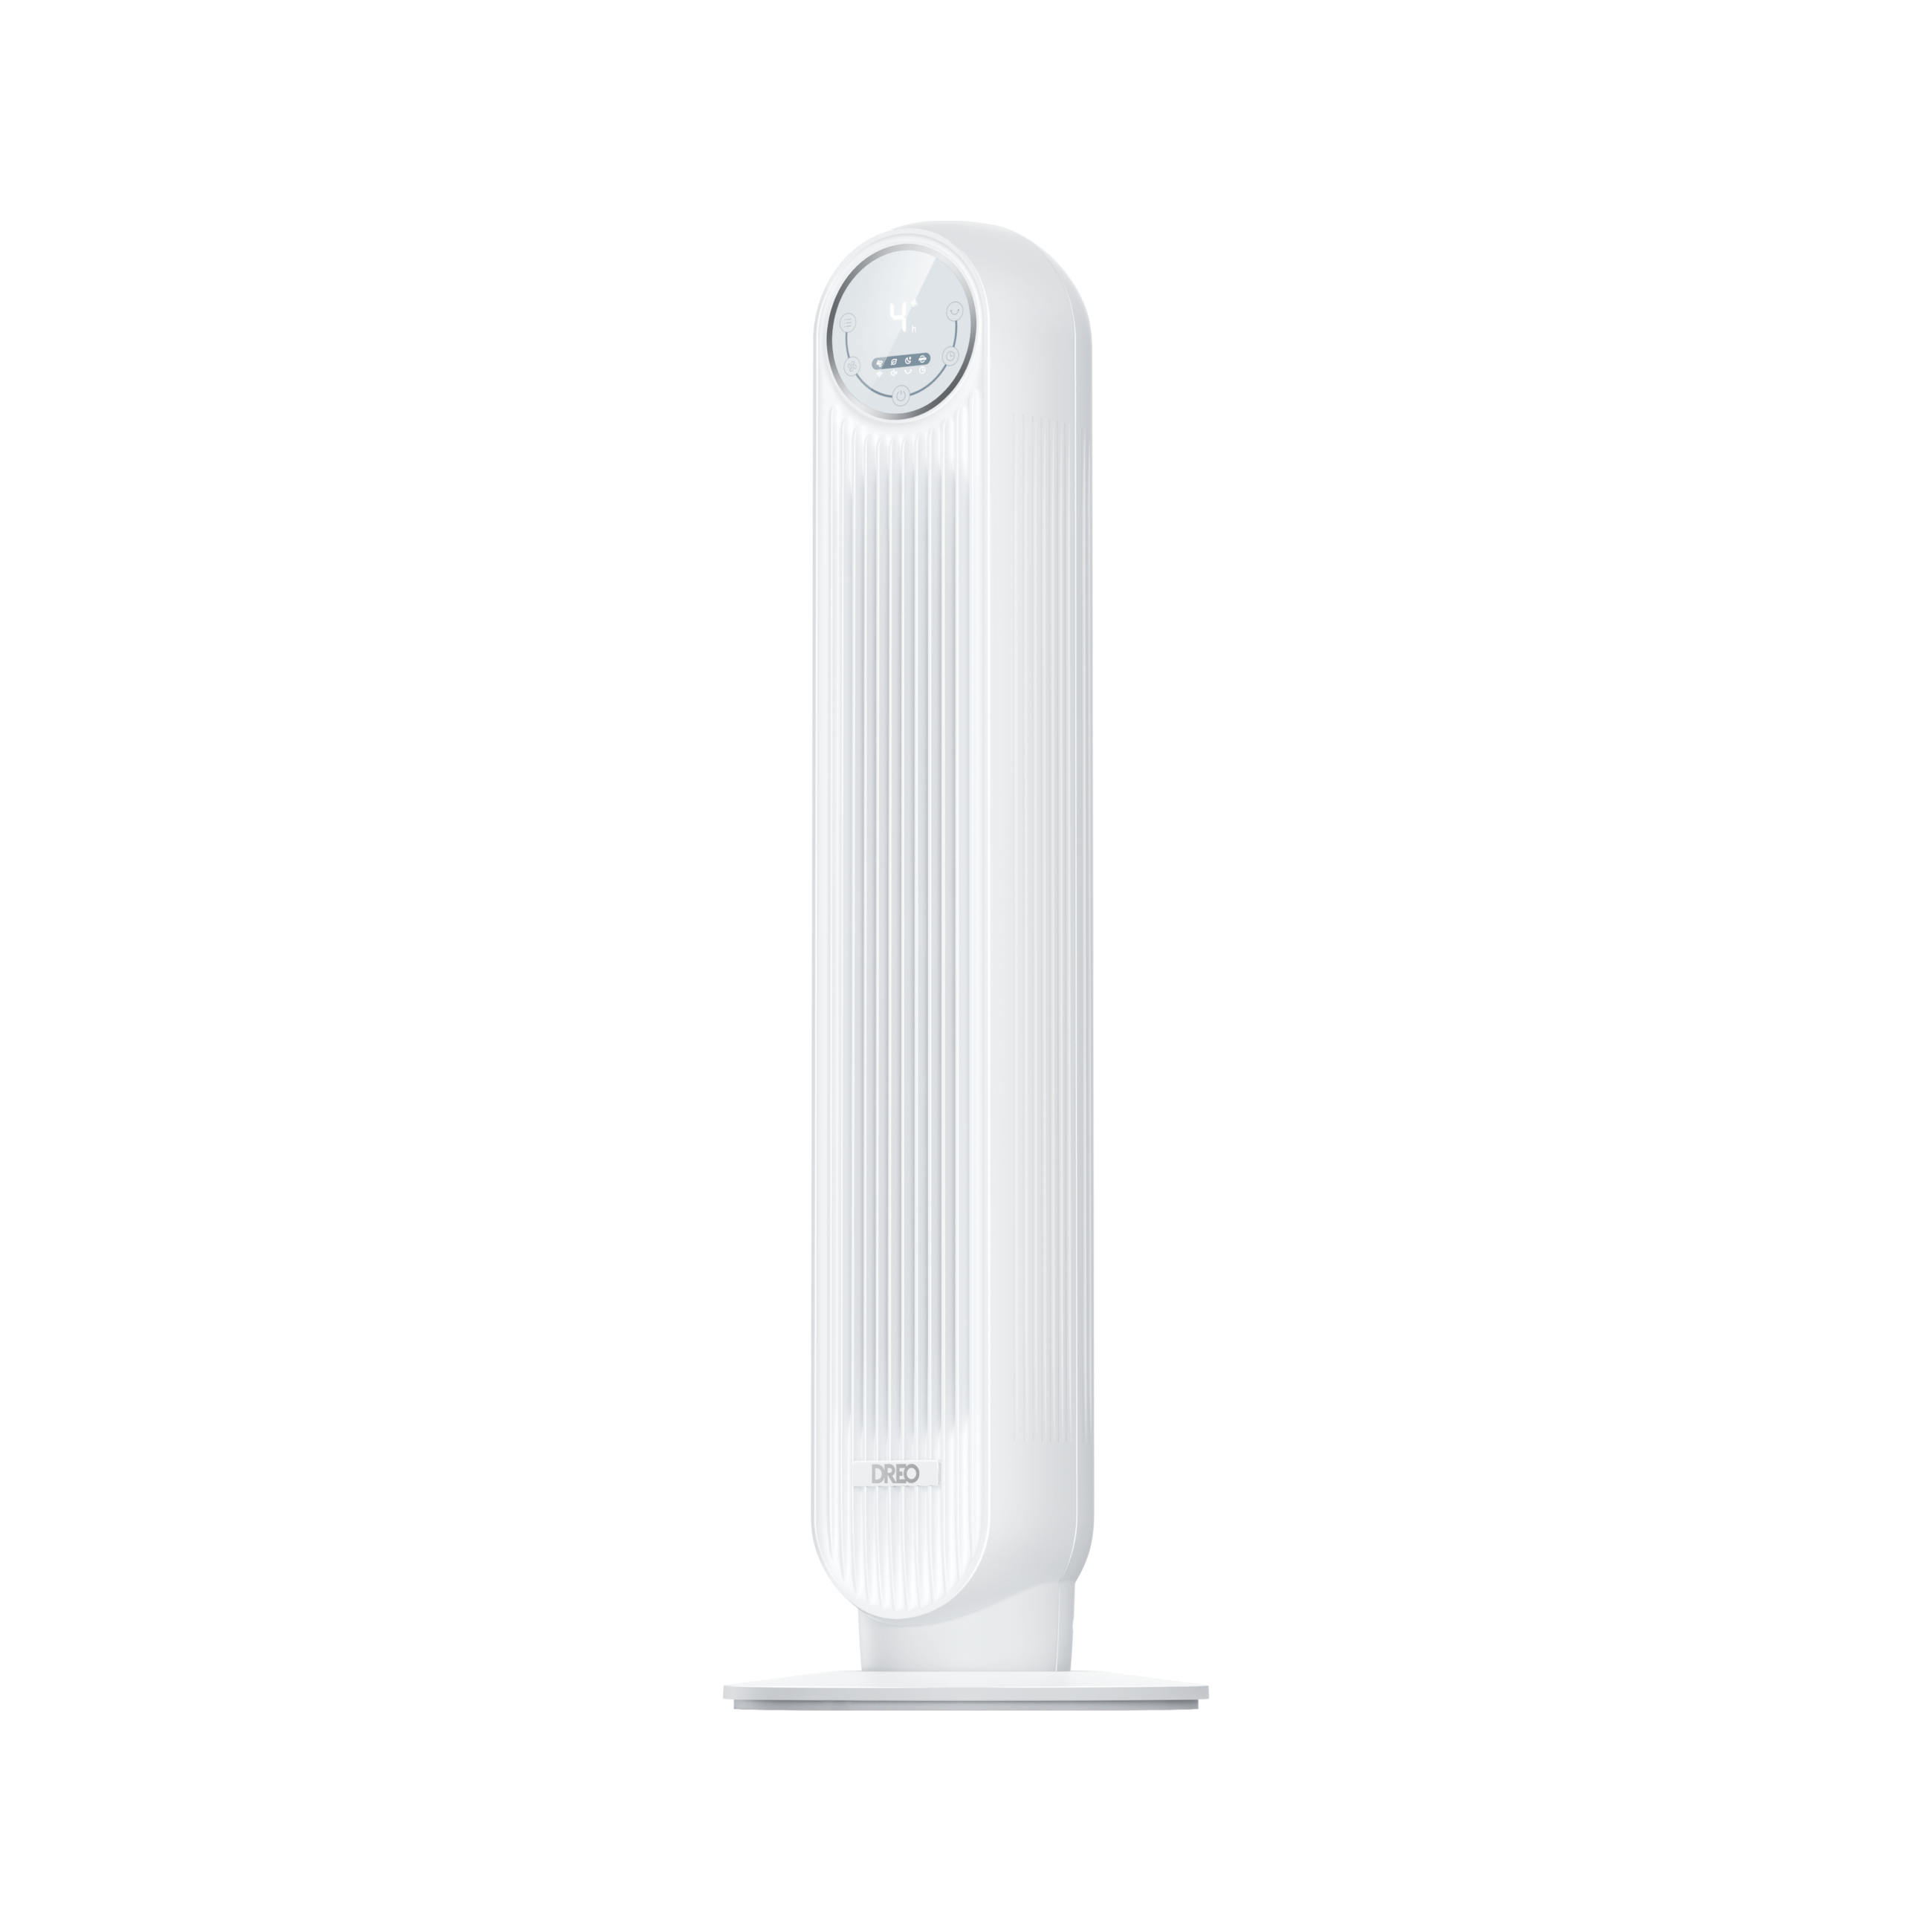 Dreo Tower Fan, Quiet Smart WiFi Fan with Remote, 90° Oscillating, Voice Control, 4 Modes, 4 Speeds, 8H Timer, DR-HTF007S White